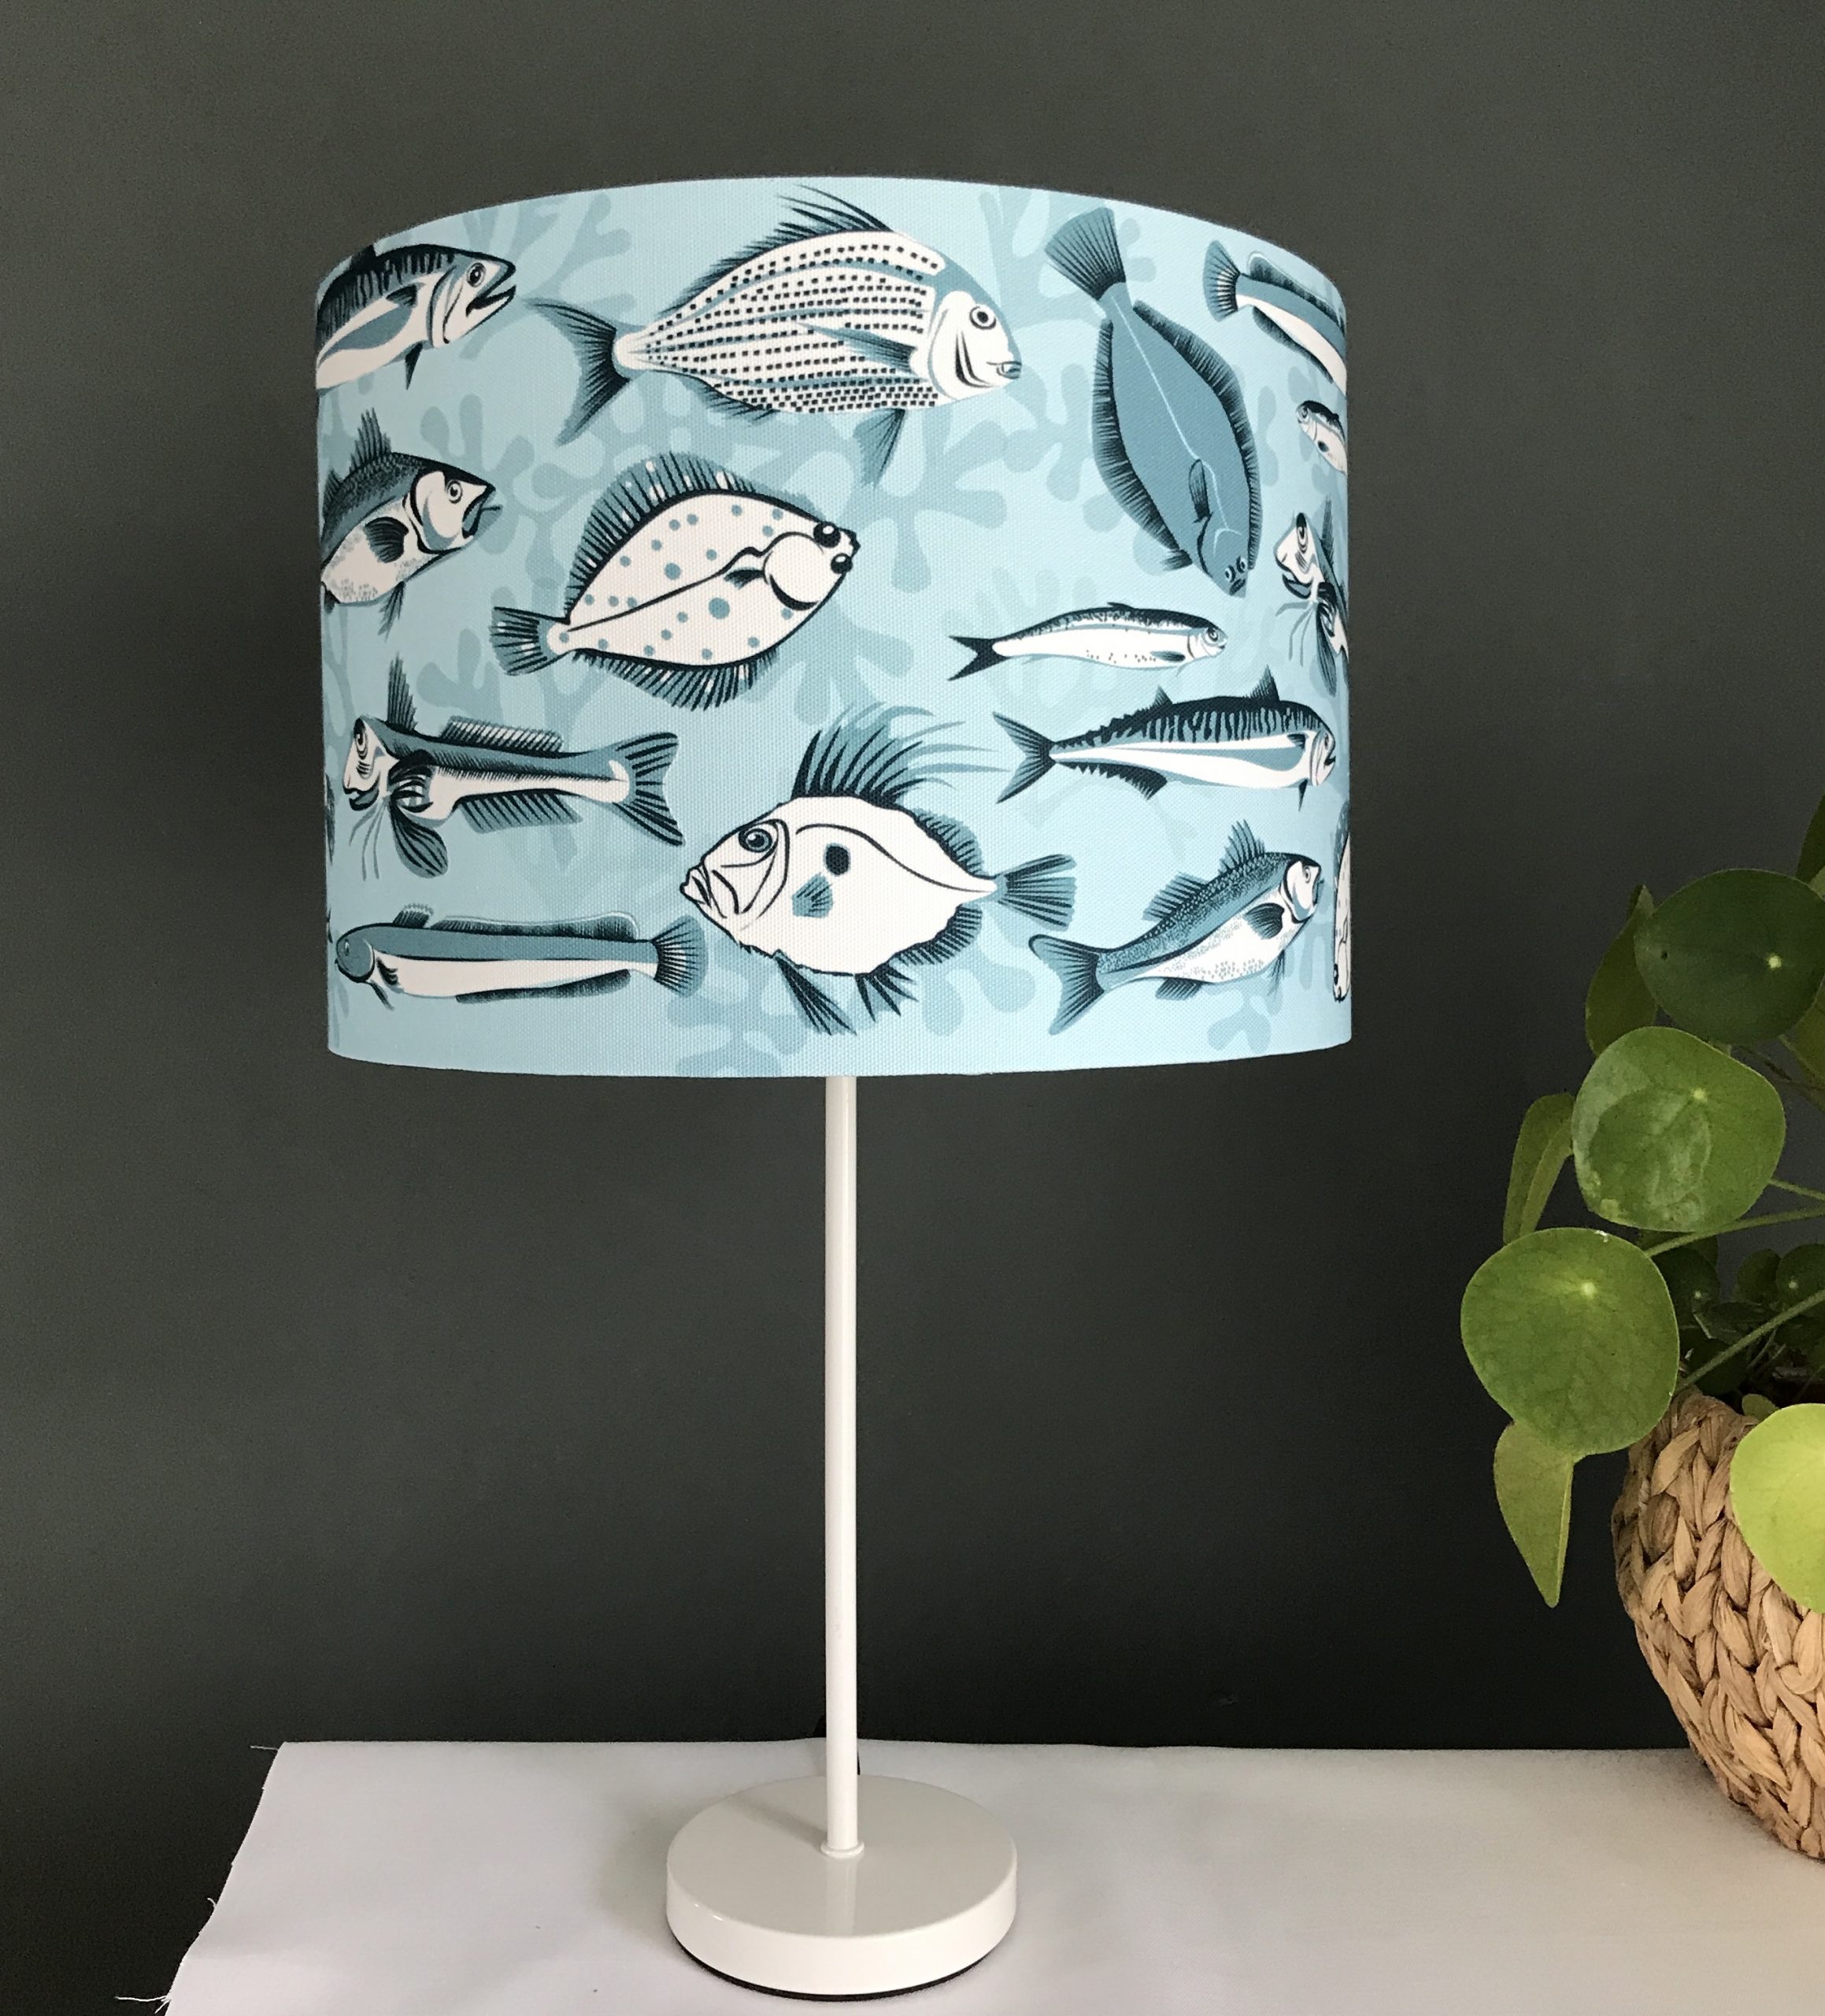 Alison Bick Catch of the Day Lampshade - 30cm diameter